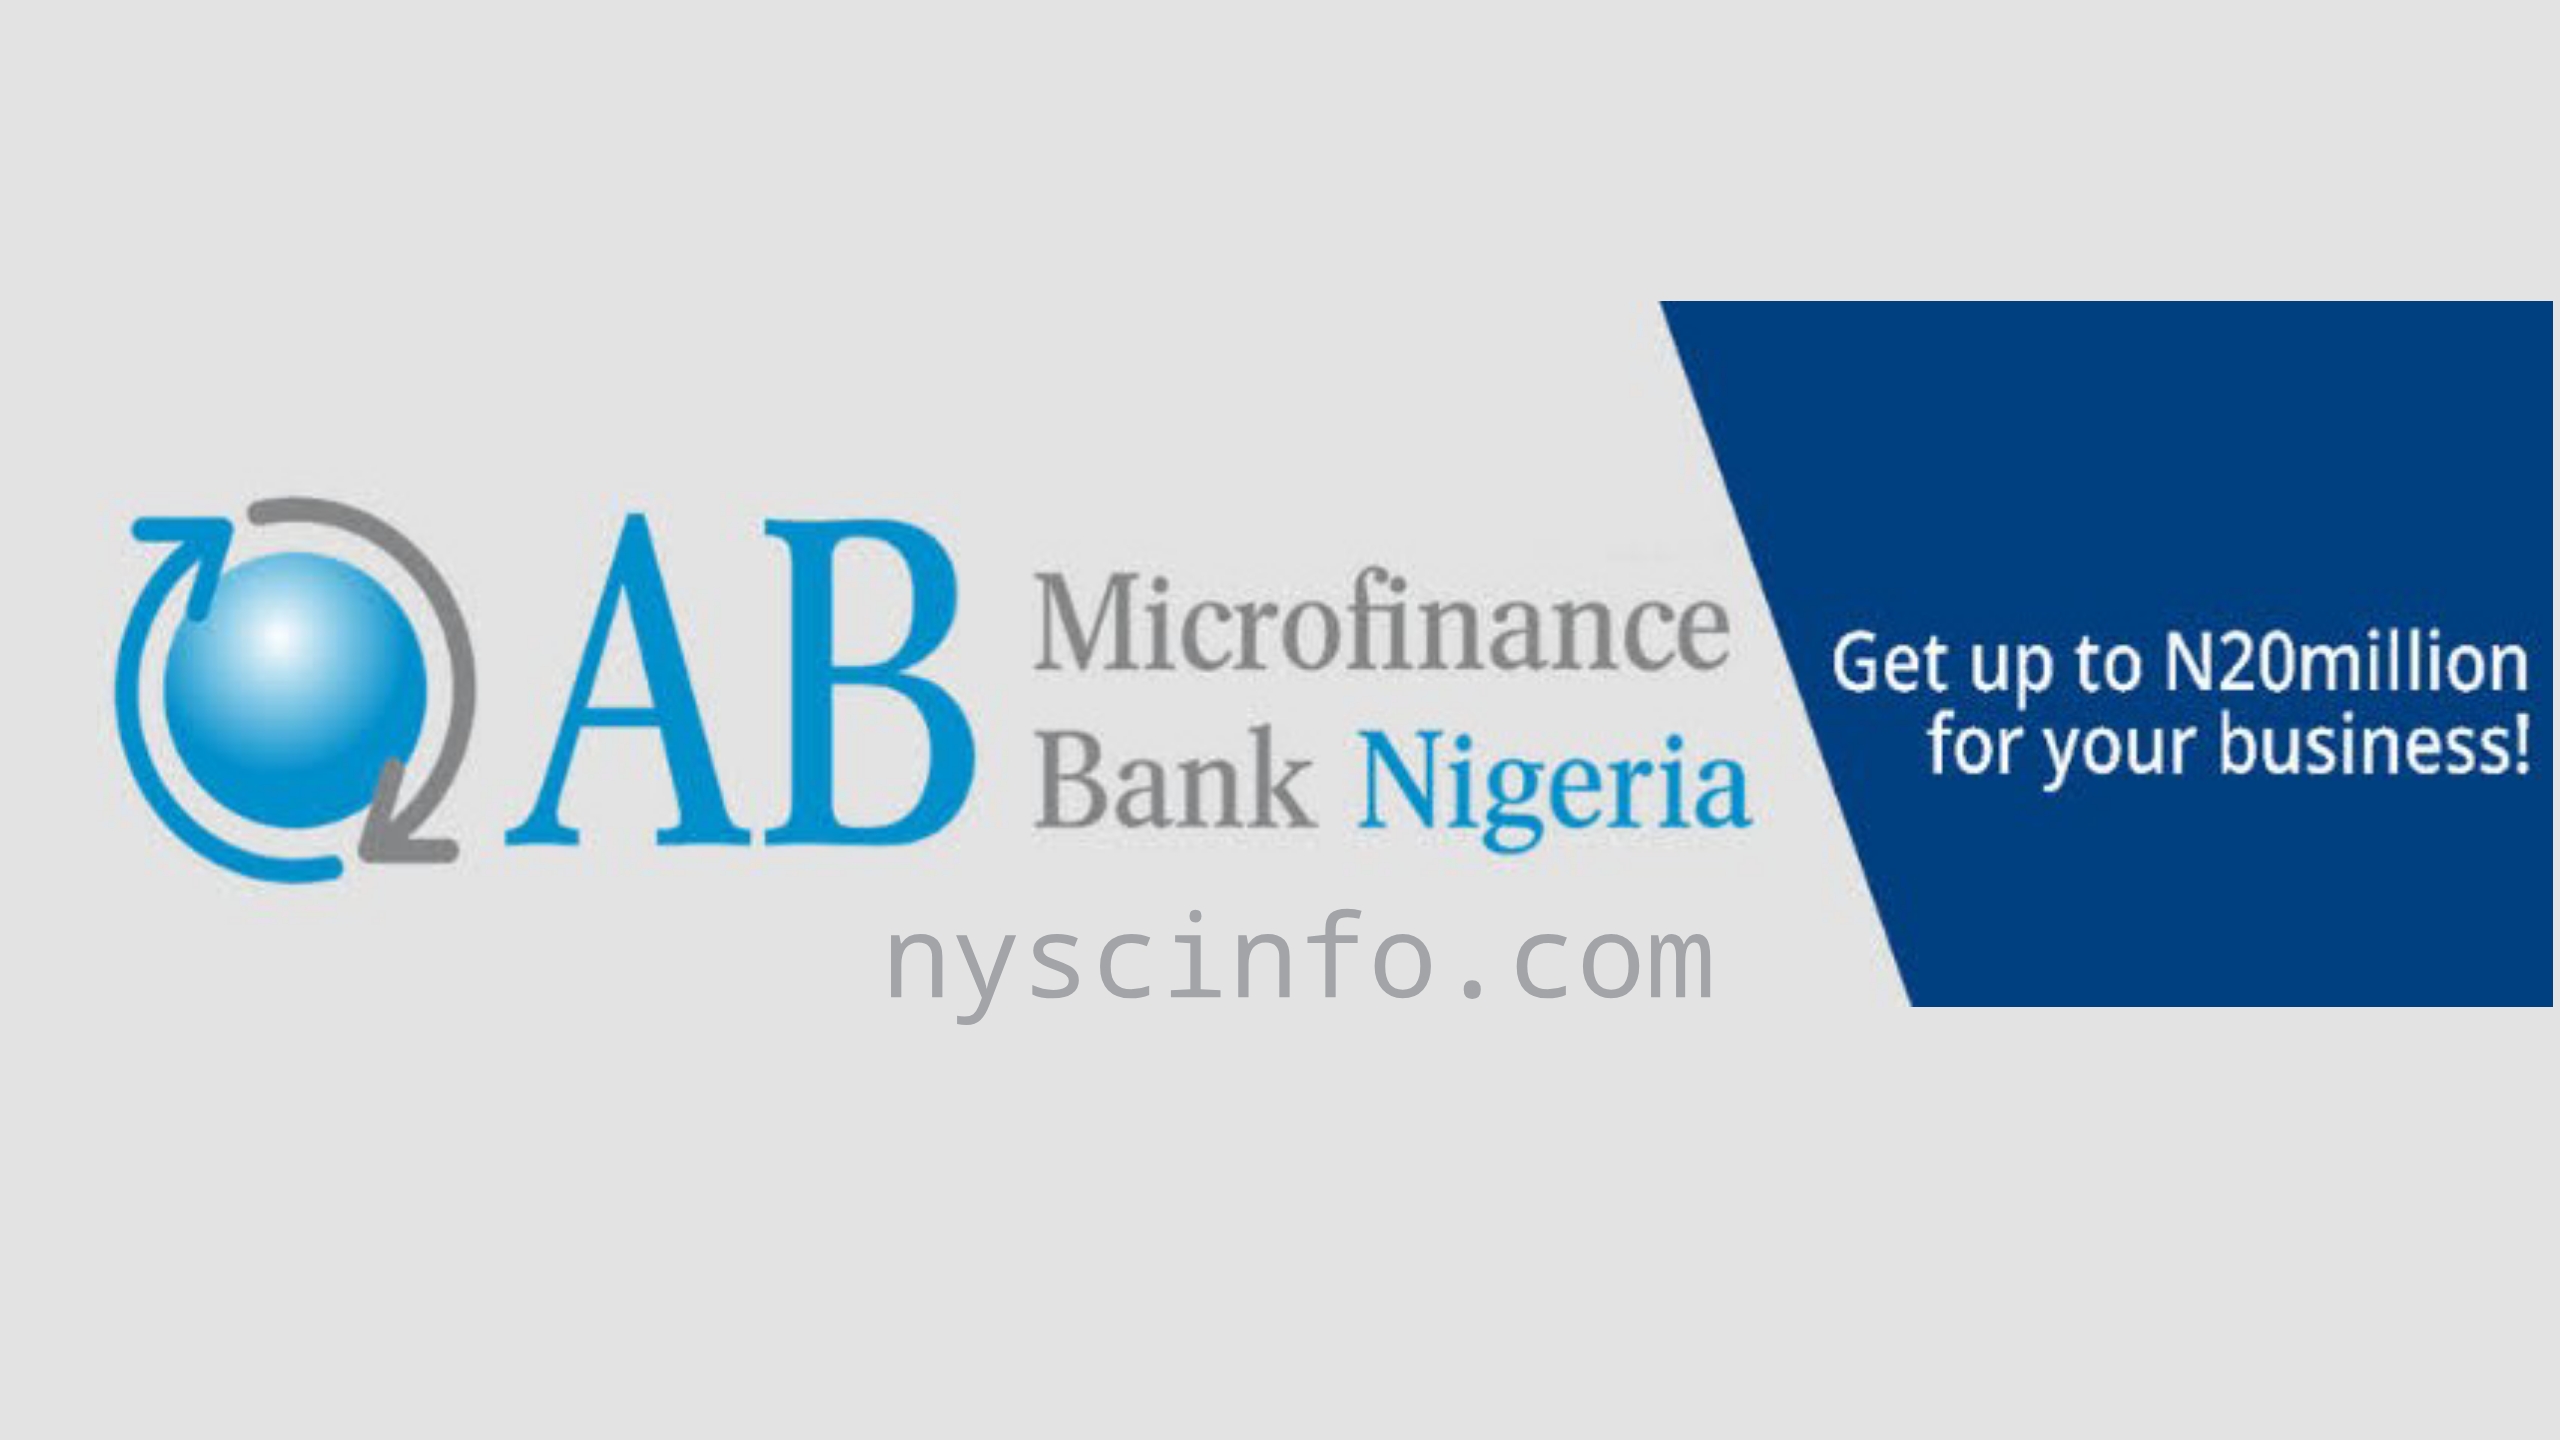 ab-microfinance-bank-loan-and-how-to-access-it-nyscinfo